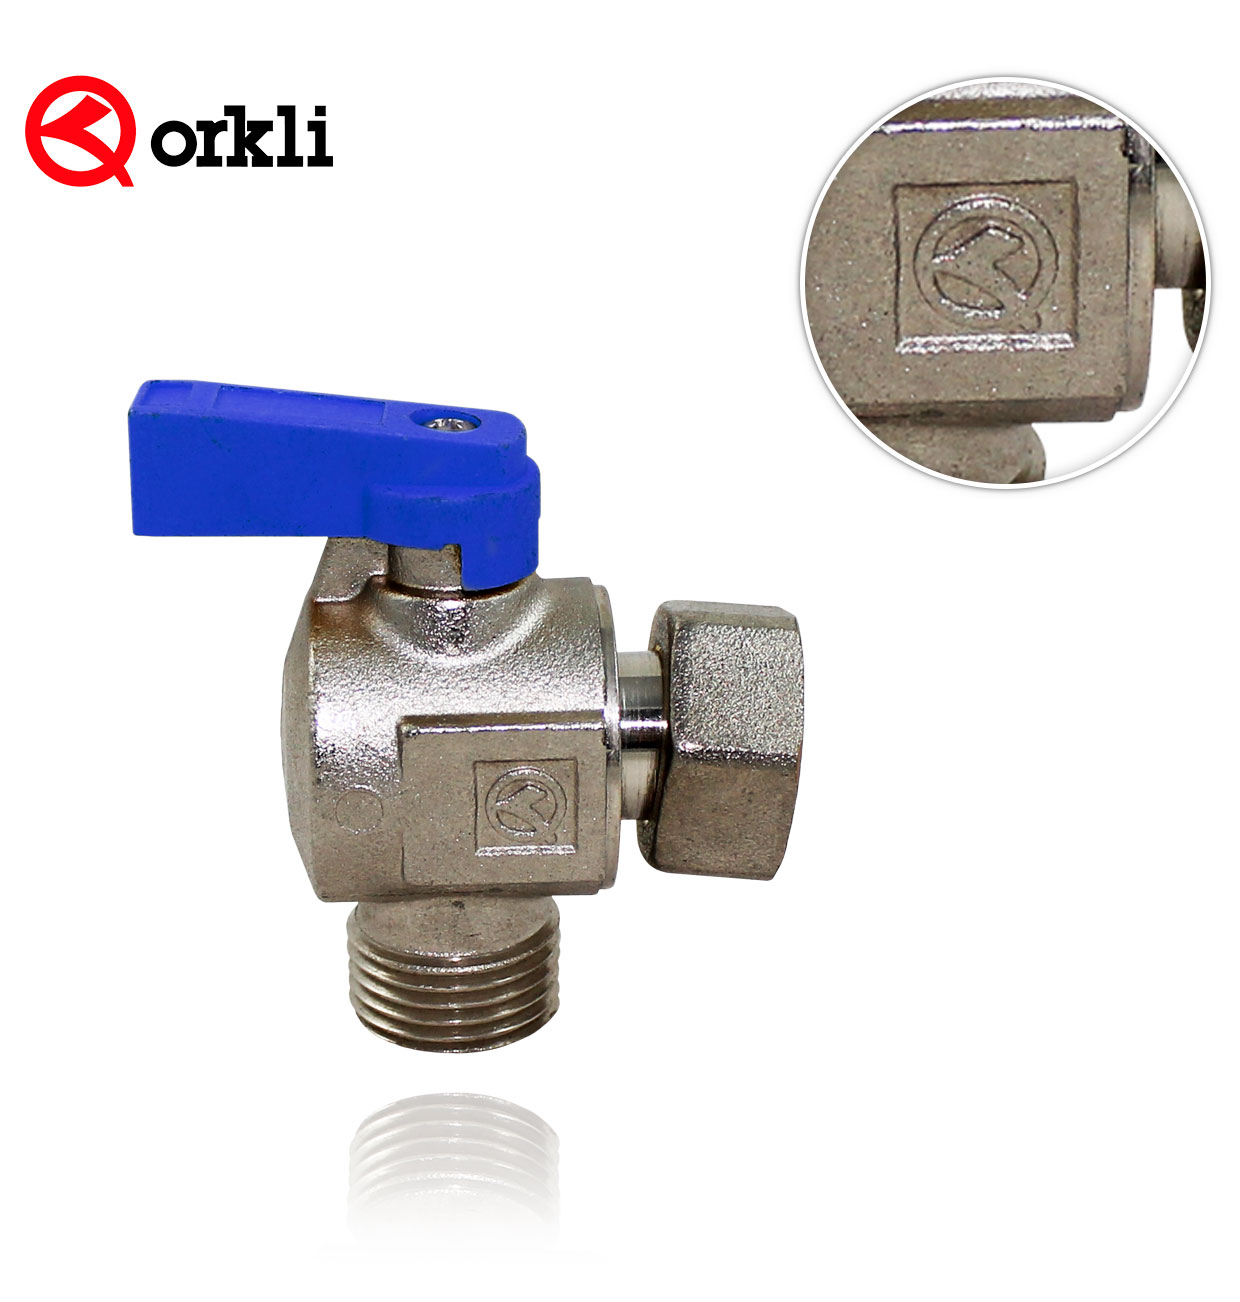 TAURO ORKLI DOMESTIC WATER GAS BOILER CONNECTION VALVE